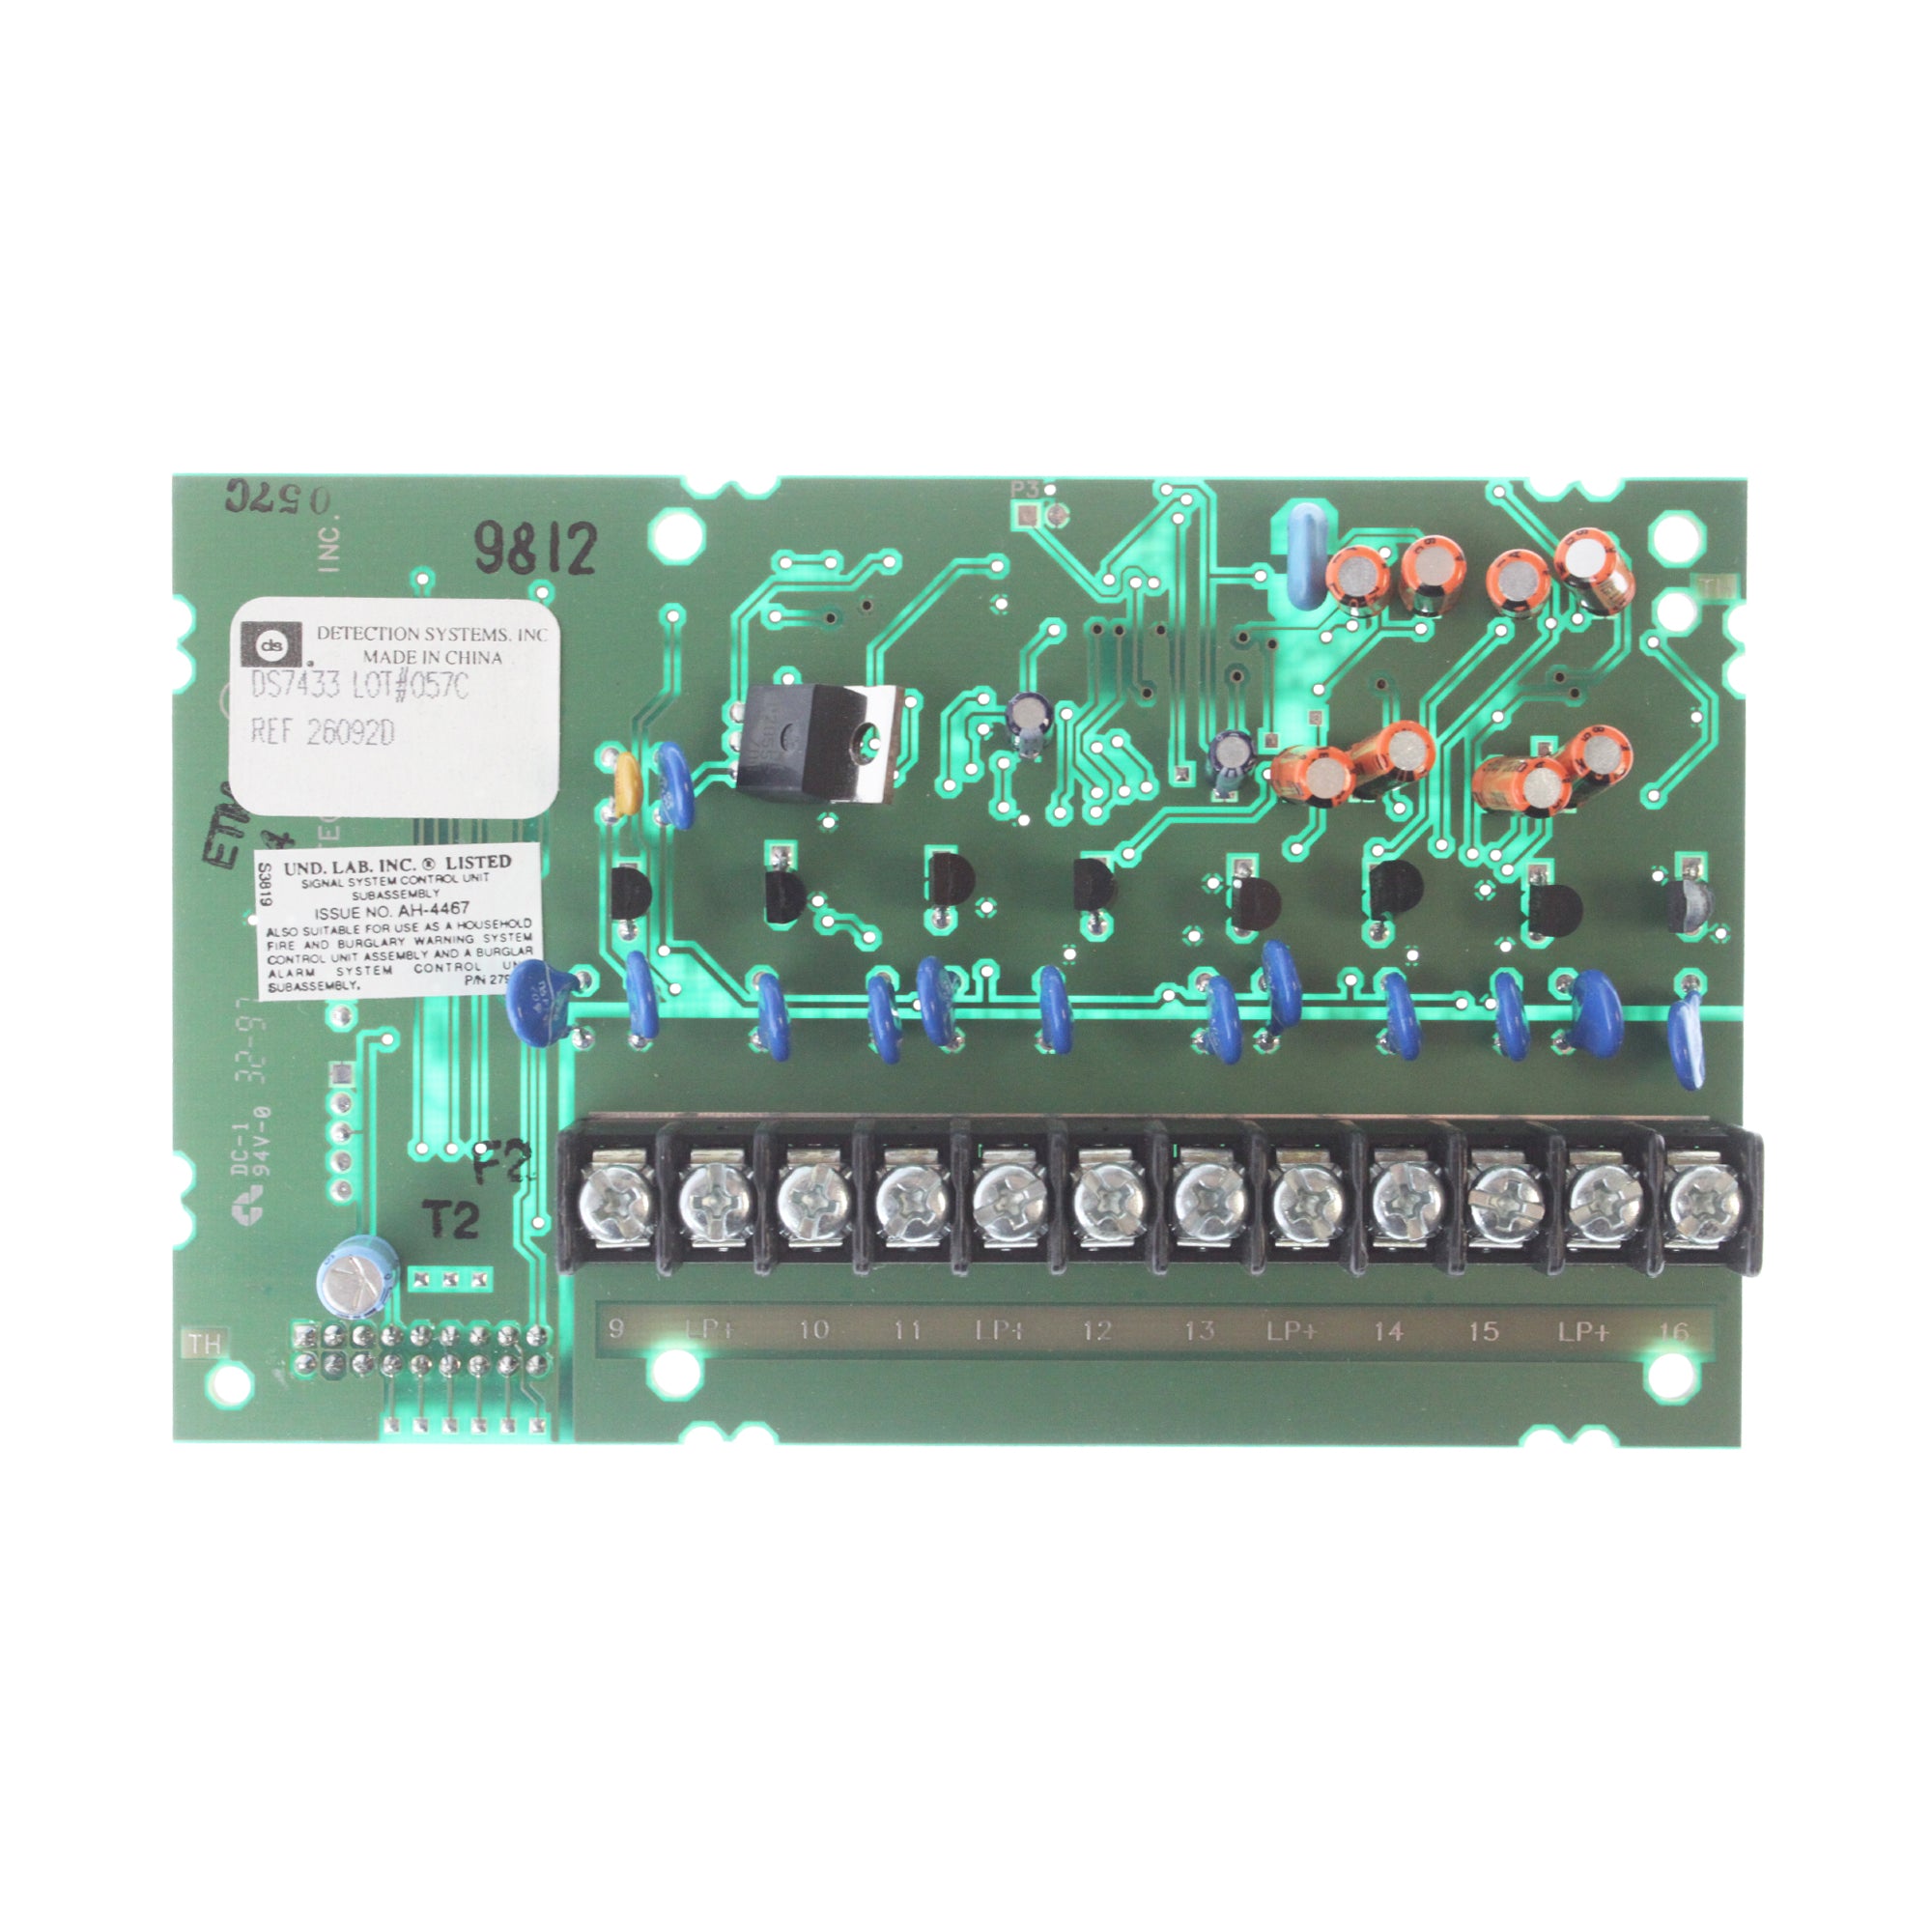 Detection Systems, DETECTION SYSTEMS DS7433 SECURITY ALARM MODULE, 8-ZONE EXPANDER MODULE